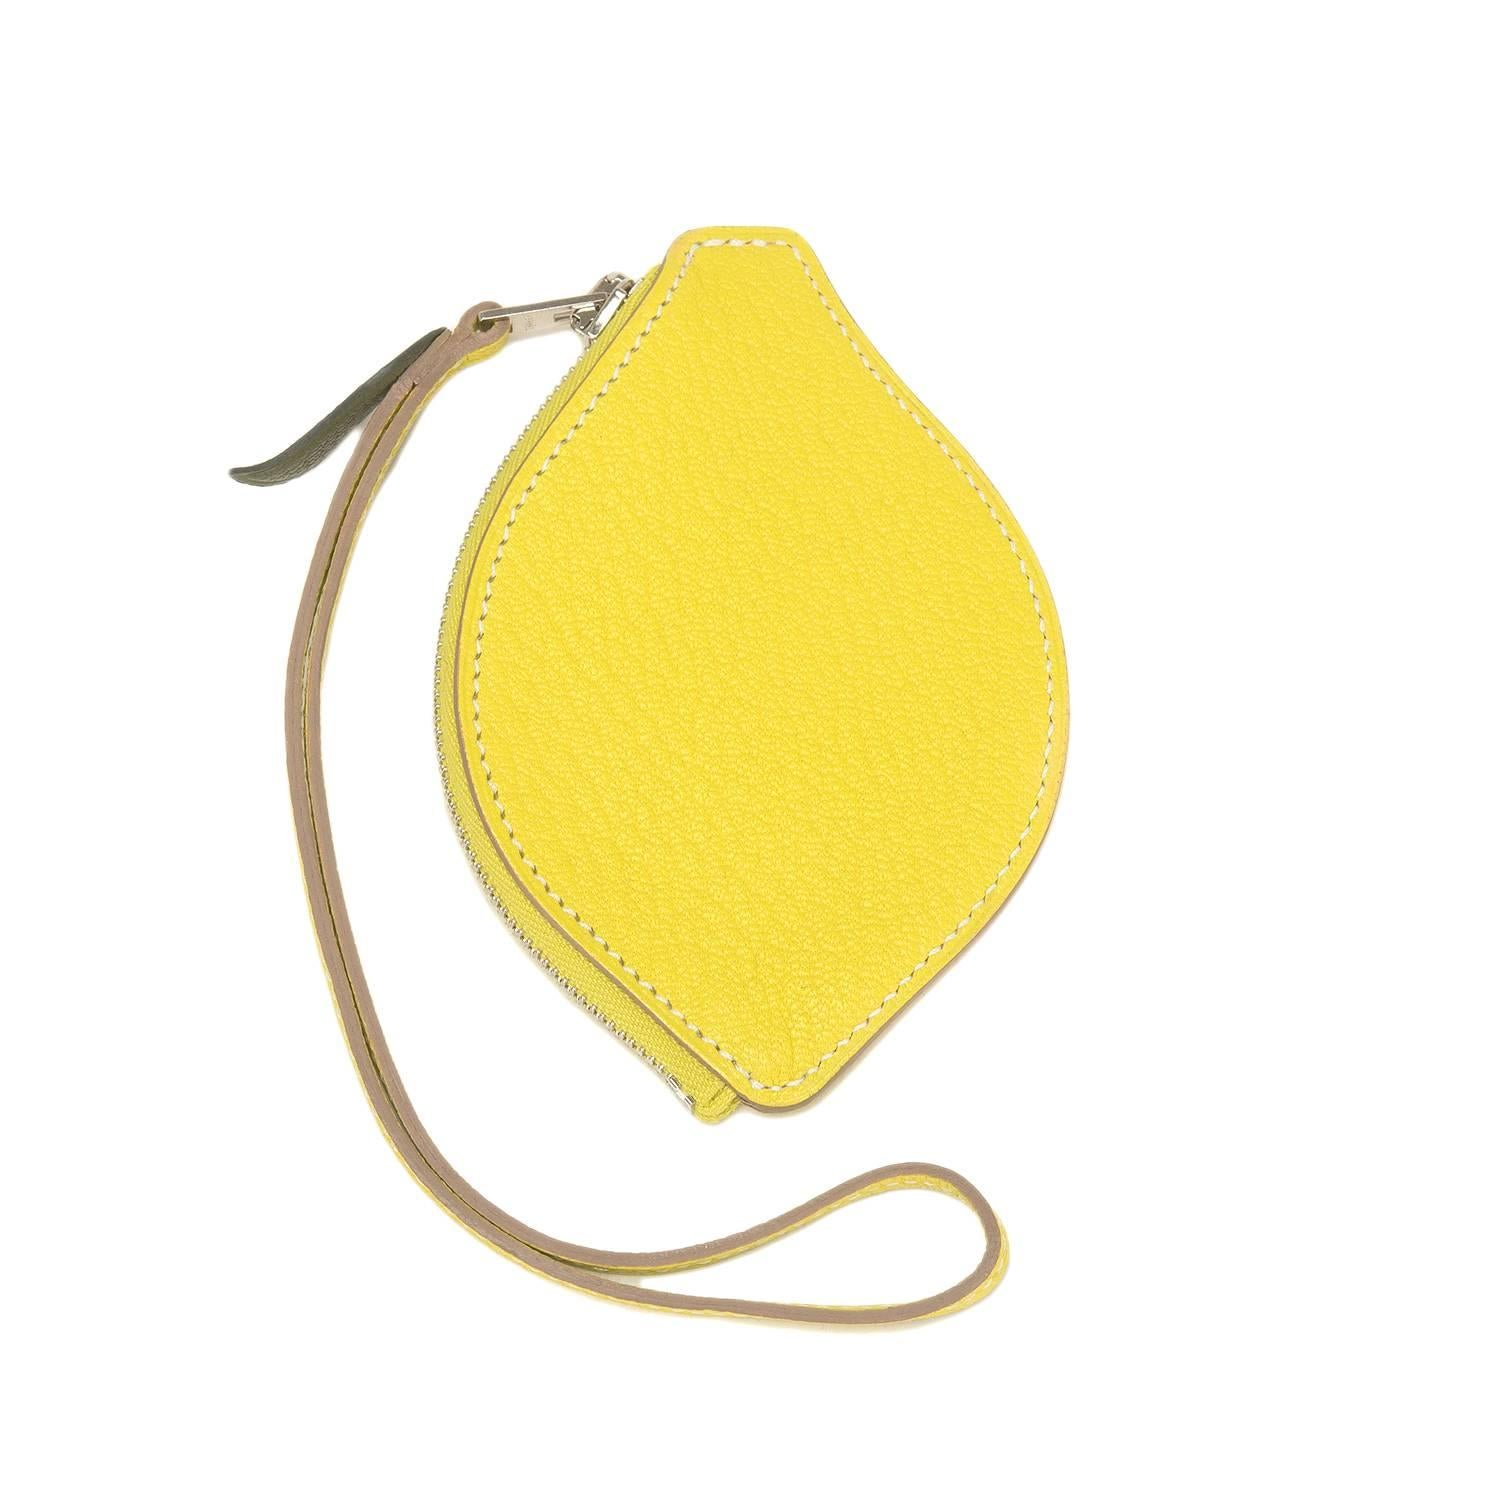 Hermes Lemon Tutti Frutti Porte Monnaie coin purse of yellow chevre leather and palladium- and silver- hardware.

This limited edition coin purse is shaped as a lemon and has tonal stitching, silver plated zipper closure and matching yellow strap so